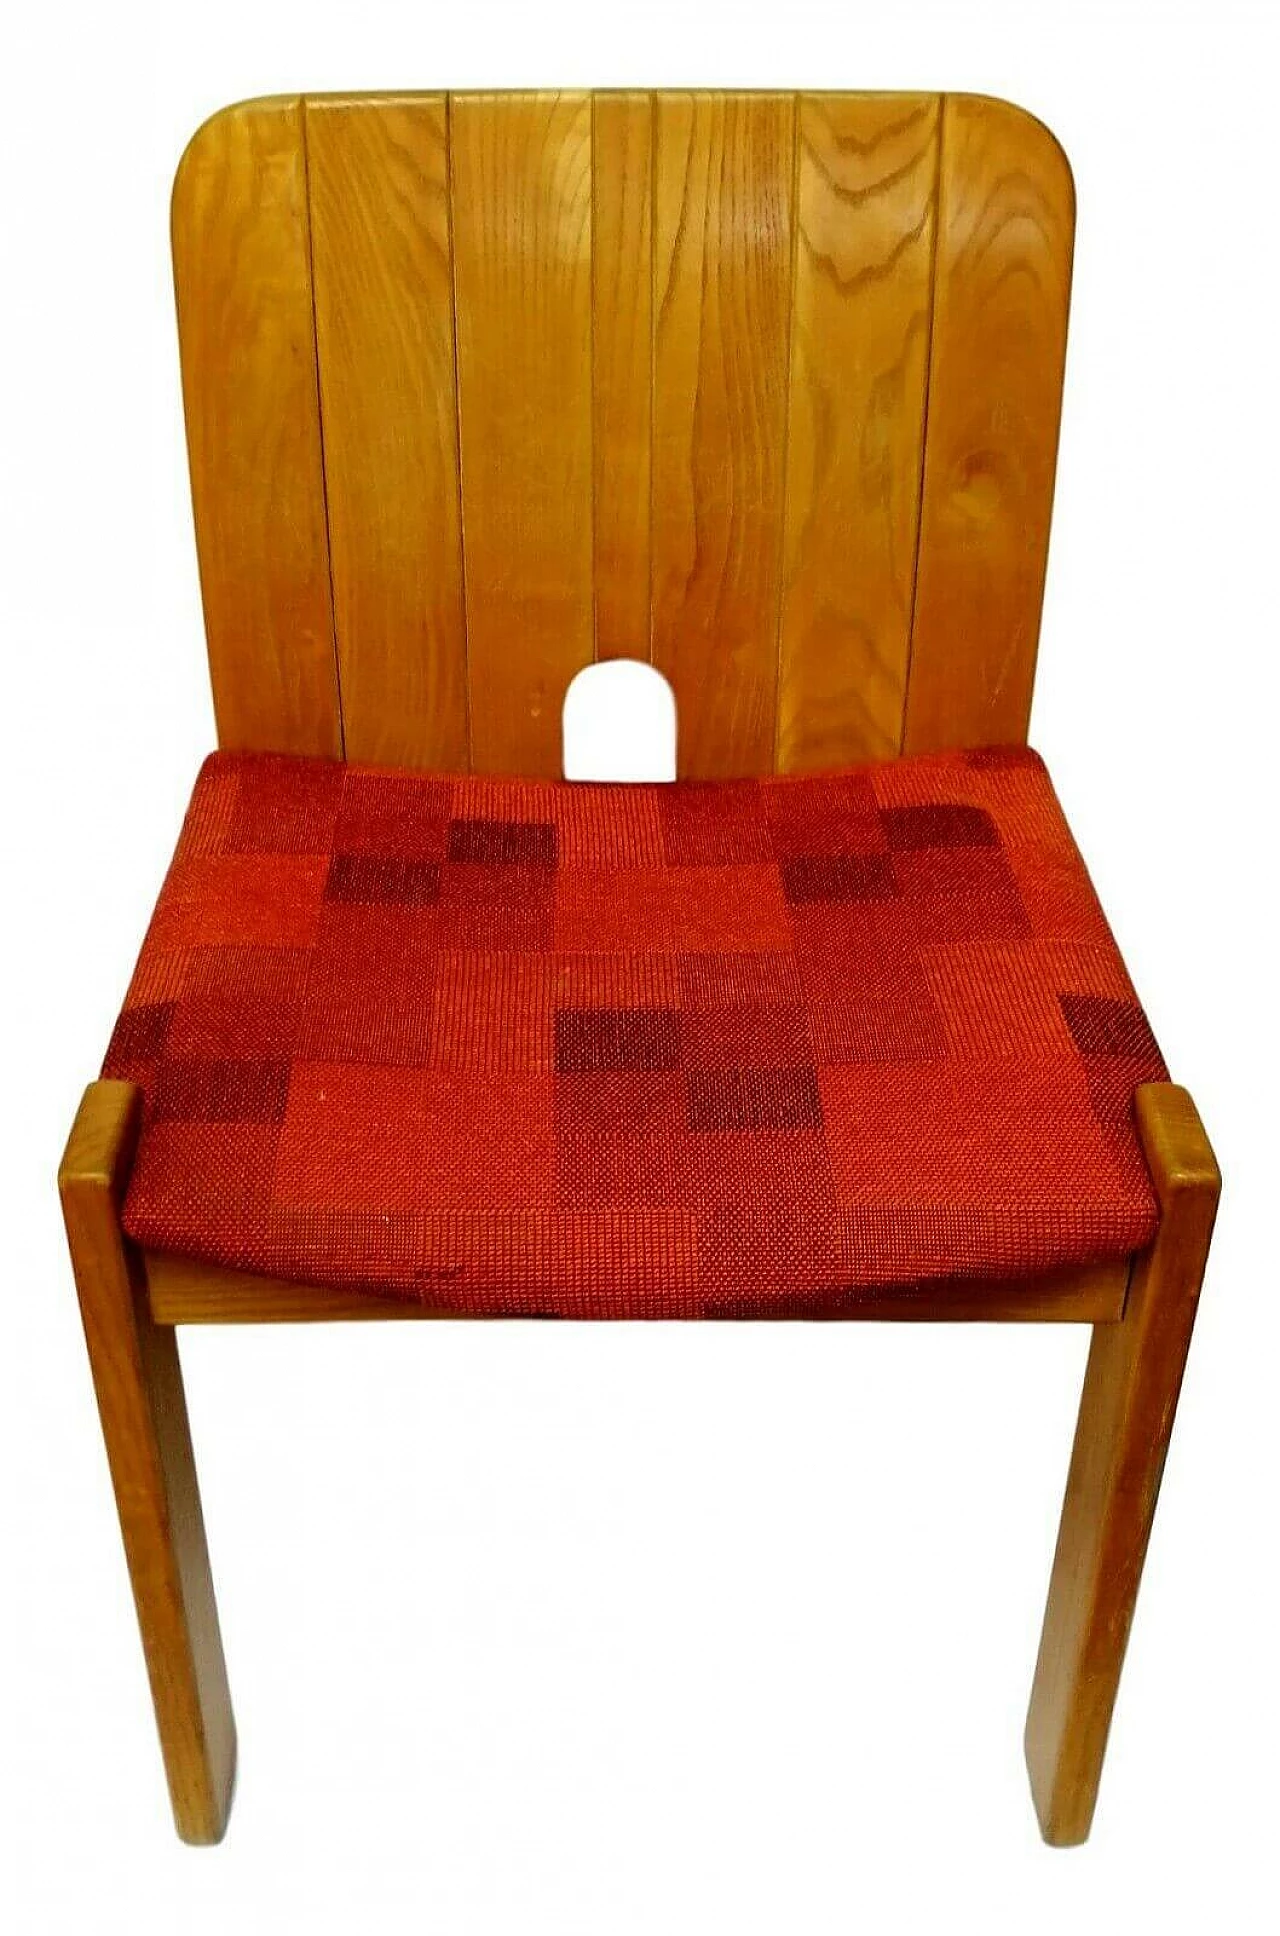 4 Design wooden chairs, 70s 1164512